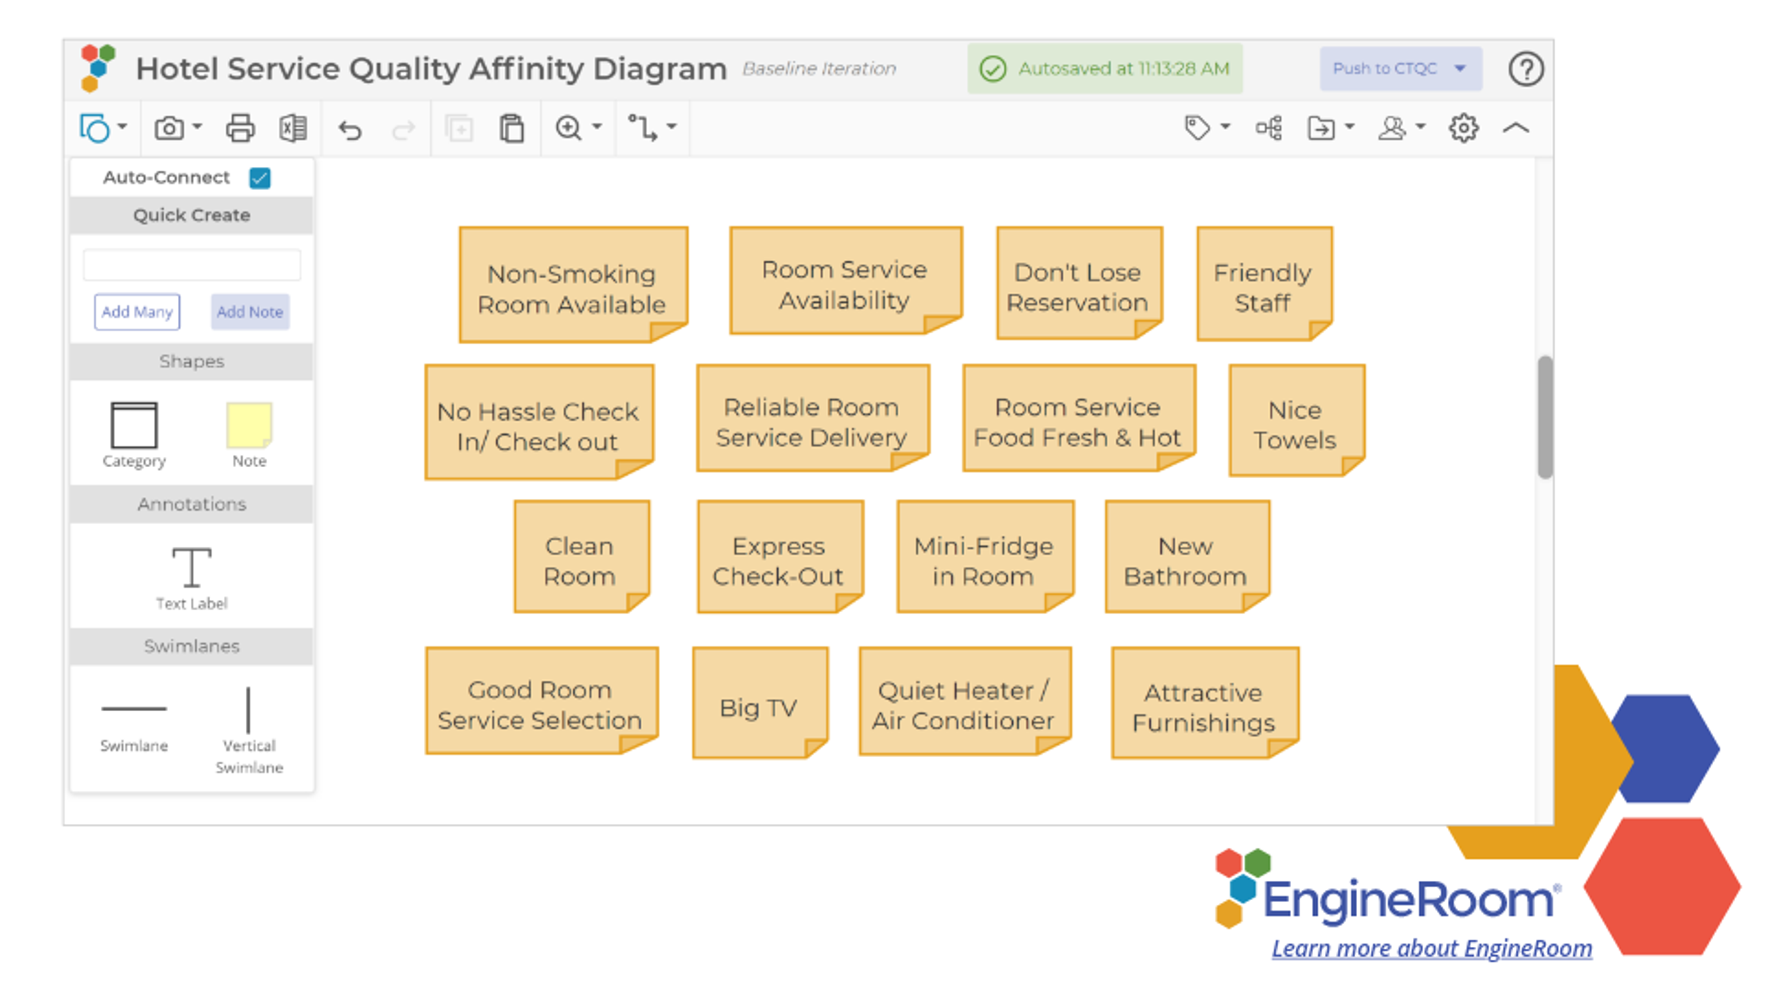 Hotel Service Quality Affinity Diagram: shows each data point on a separate note